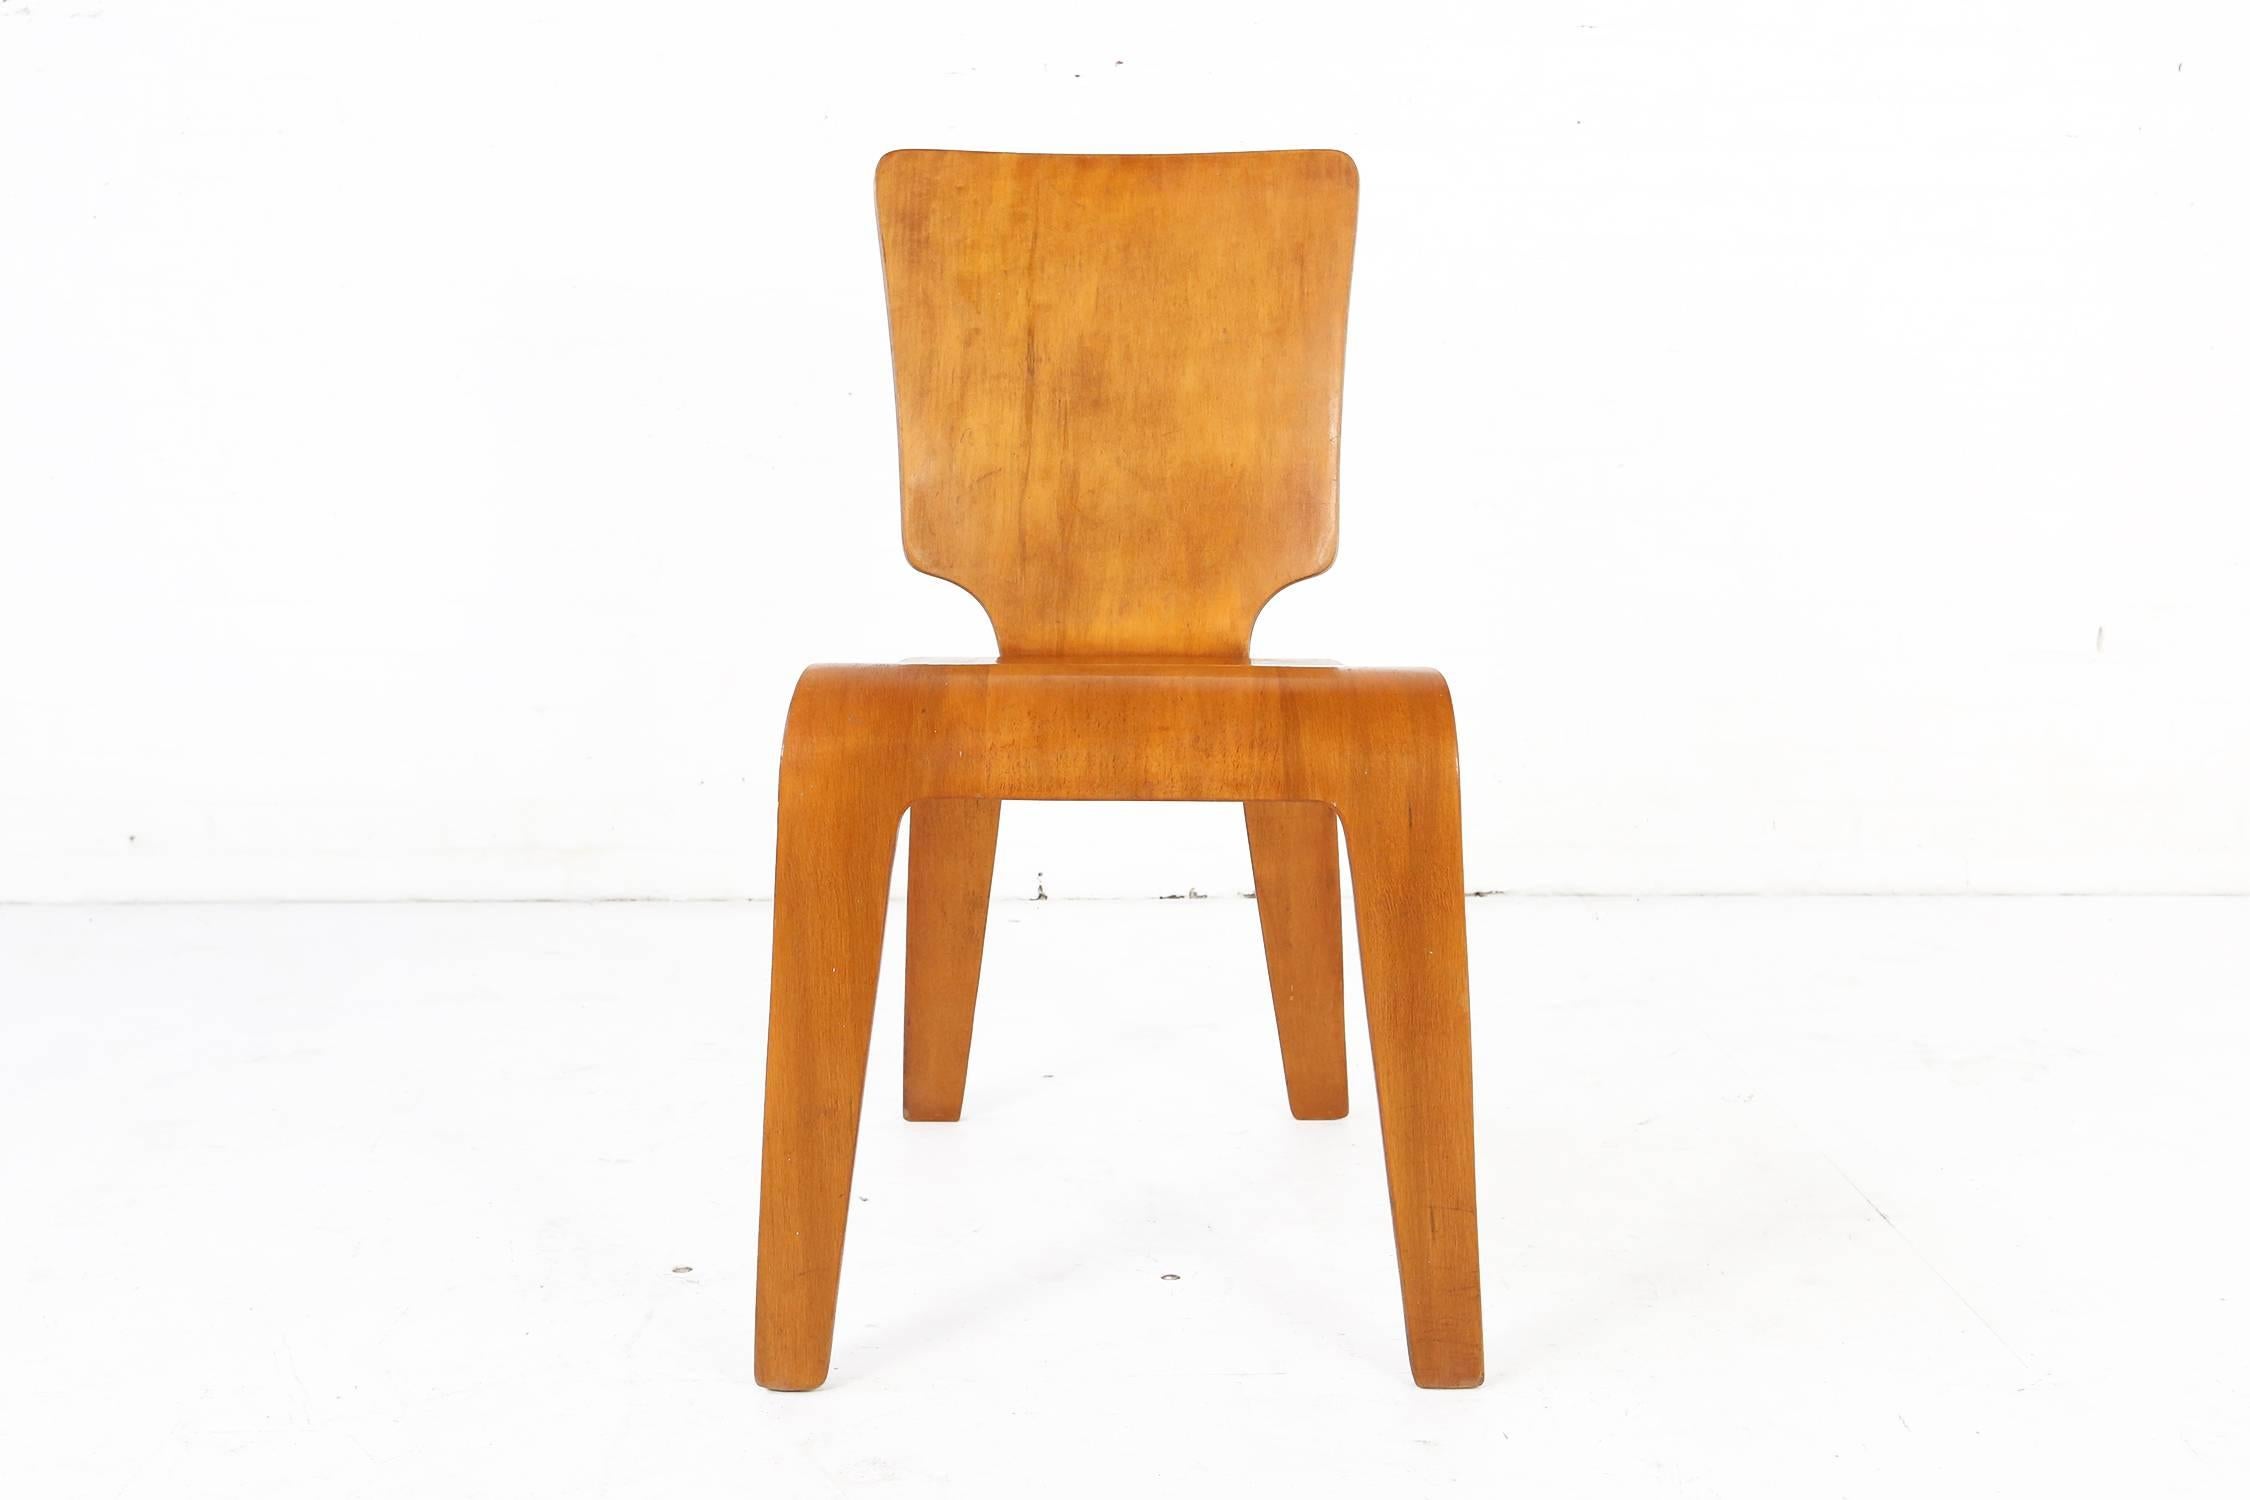 A molded plywood side chair by Herbert Von Thaden who during the period of the 1940s used building methods founded in World War II, using molded plywood in the manner of Eames, Eigerman, Han Pieck and other top designers of the period. Retains the